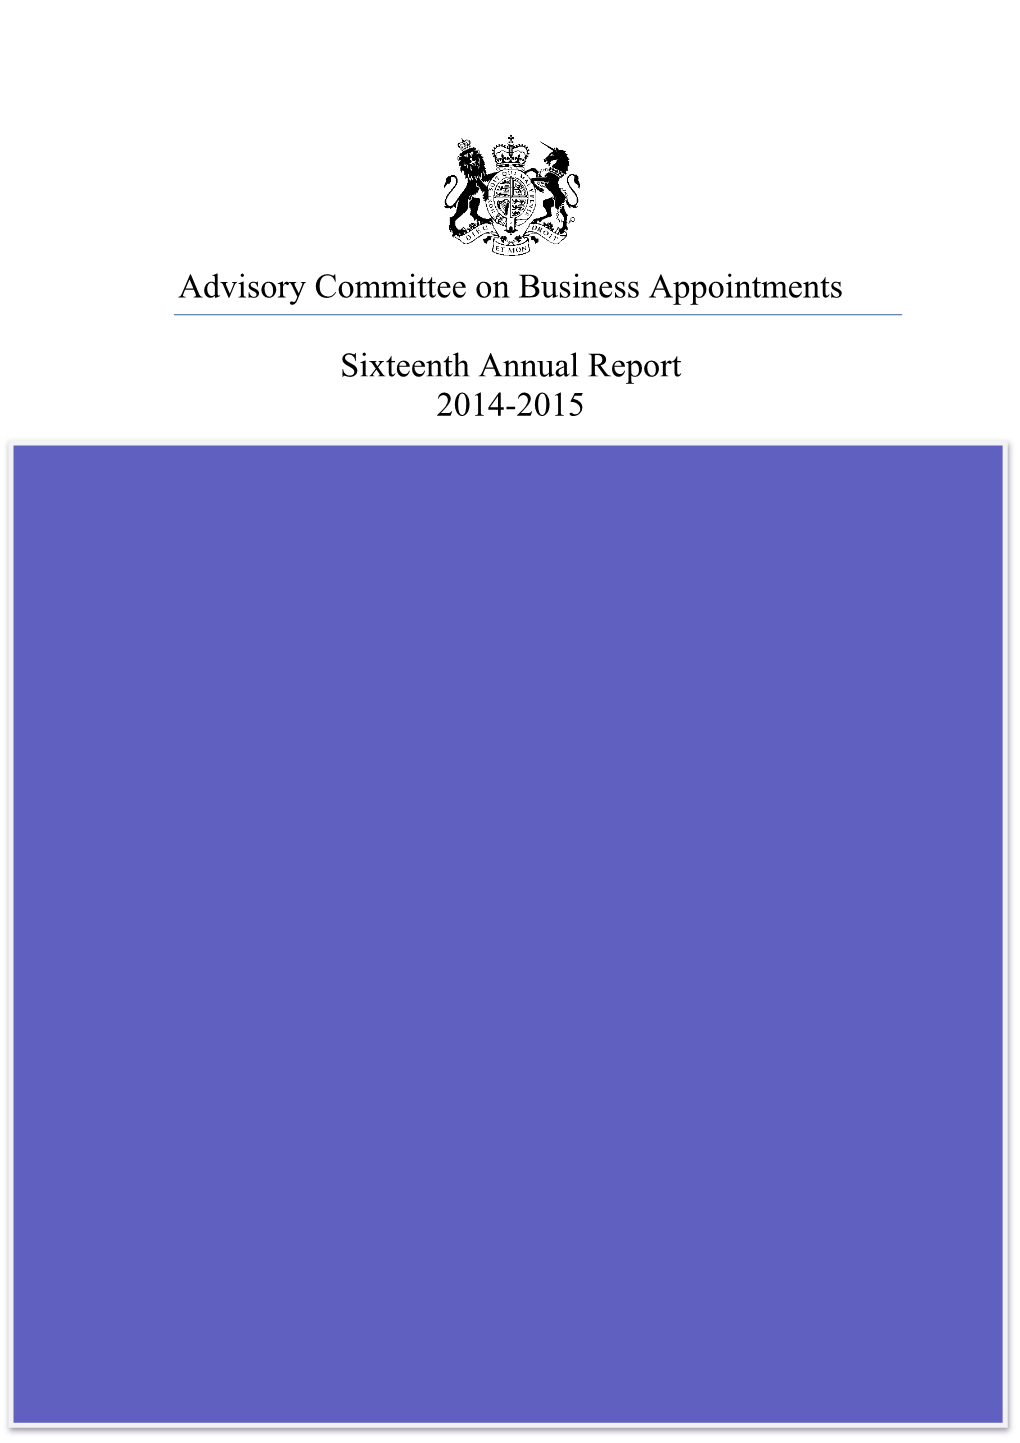 Advisory Committee on Business Appointments Sixteenth Annual Report 2014-2015